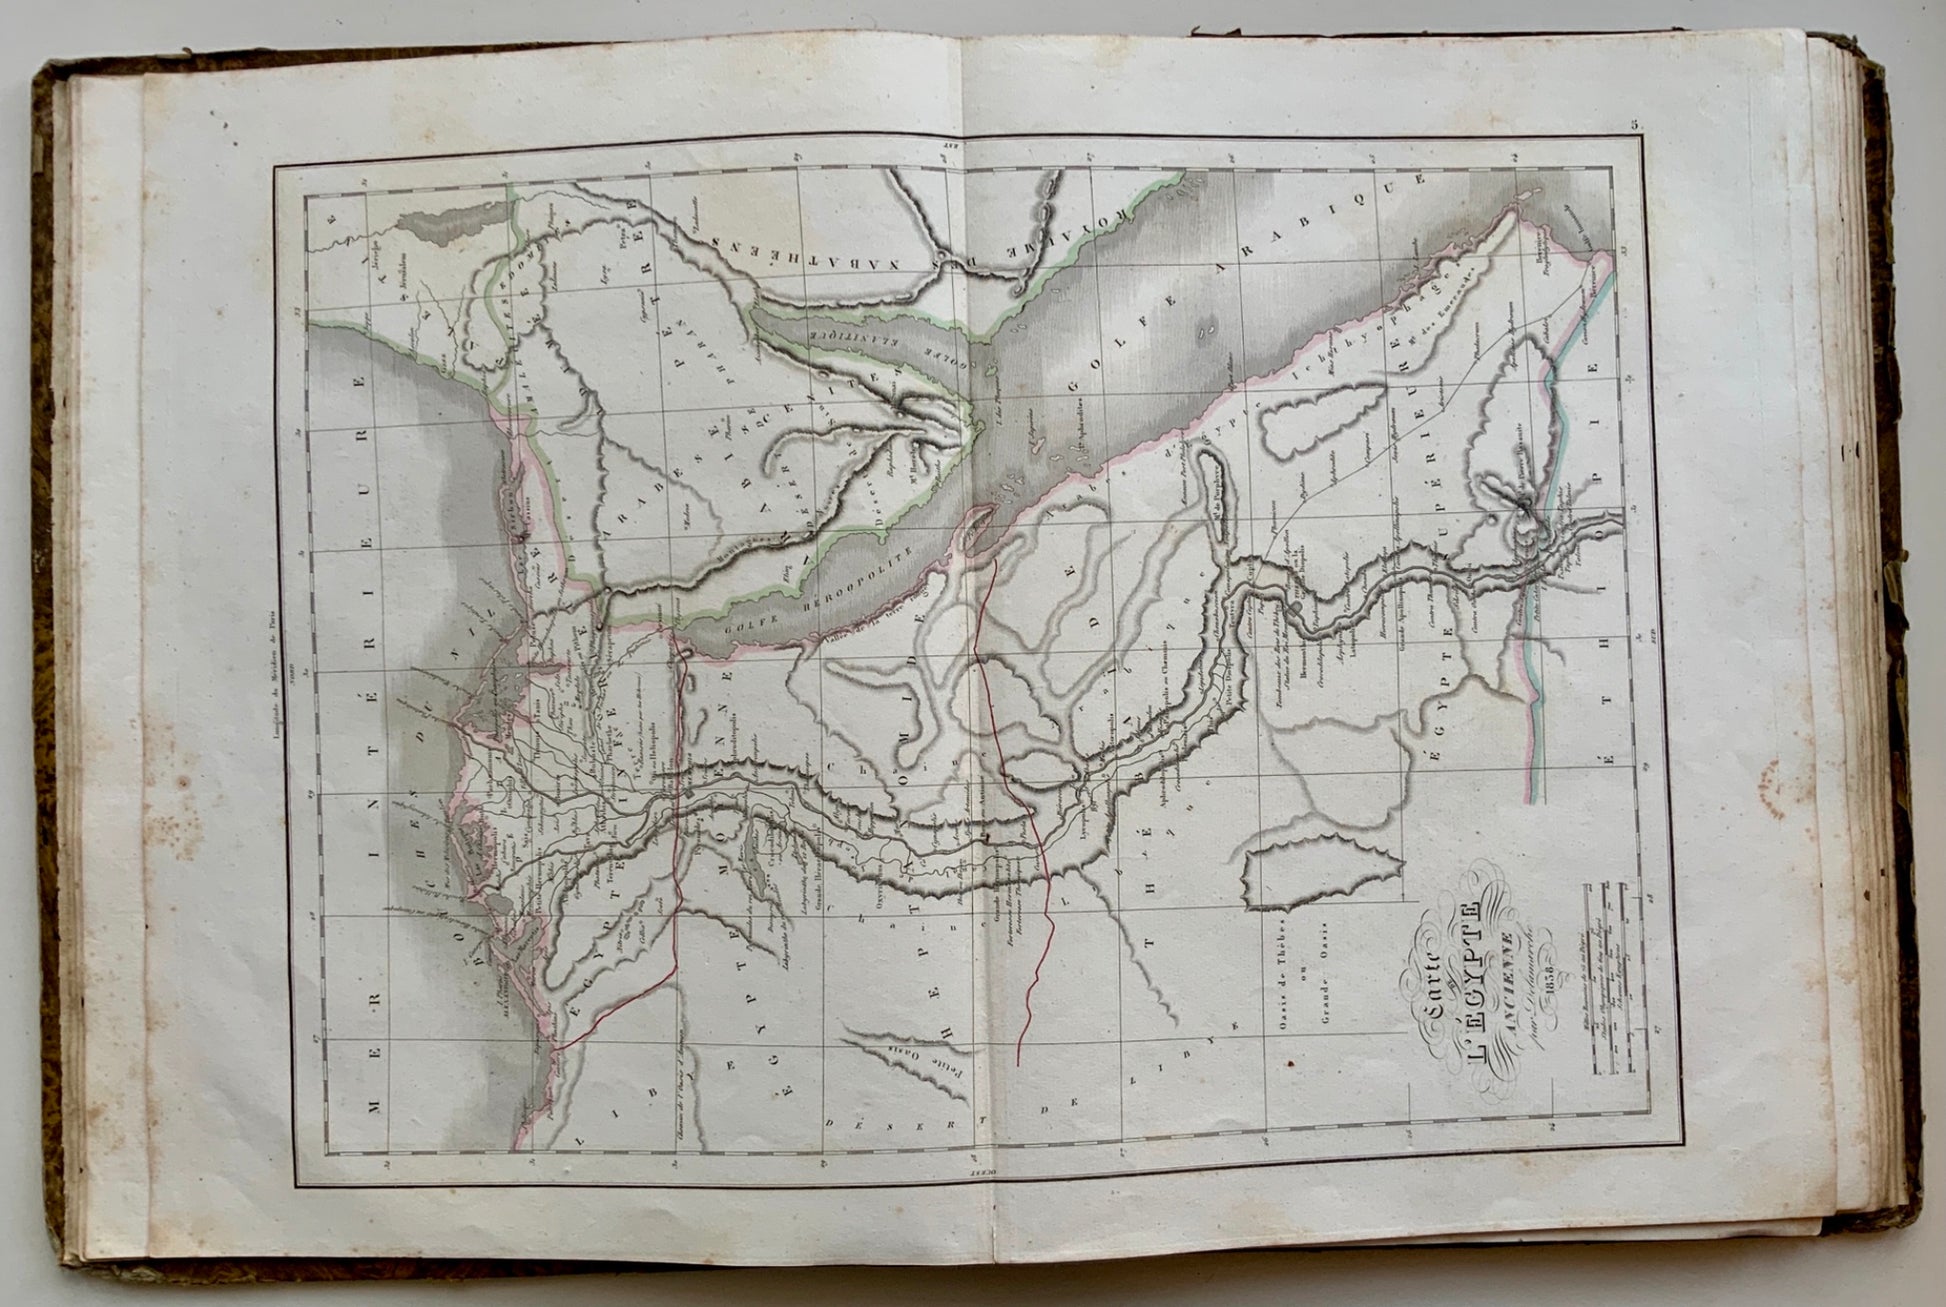 1846 folio Delamarche Atlas of the World - 37 double page and hand coloured map